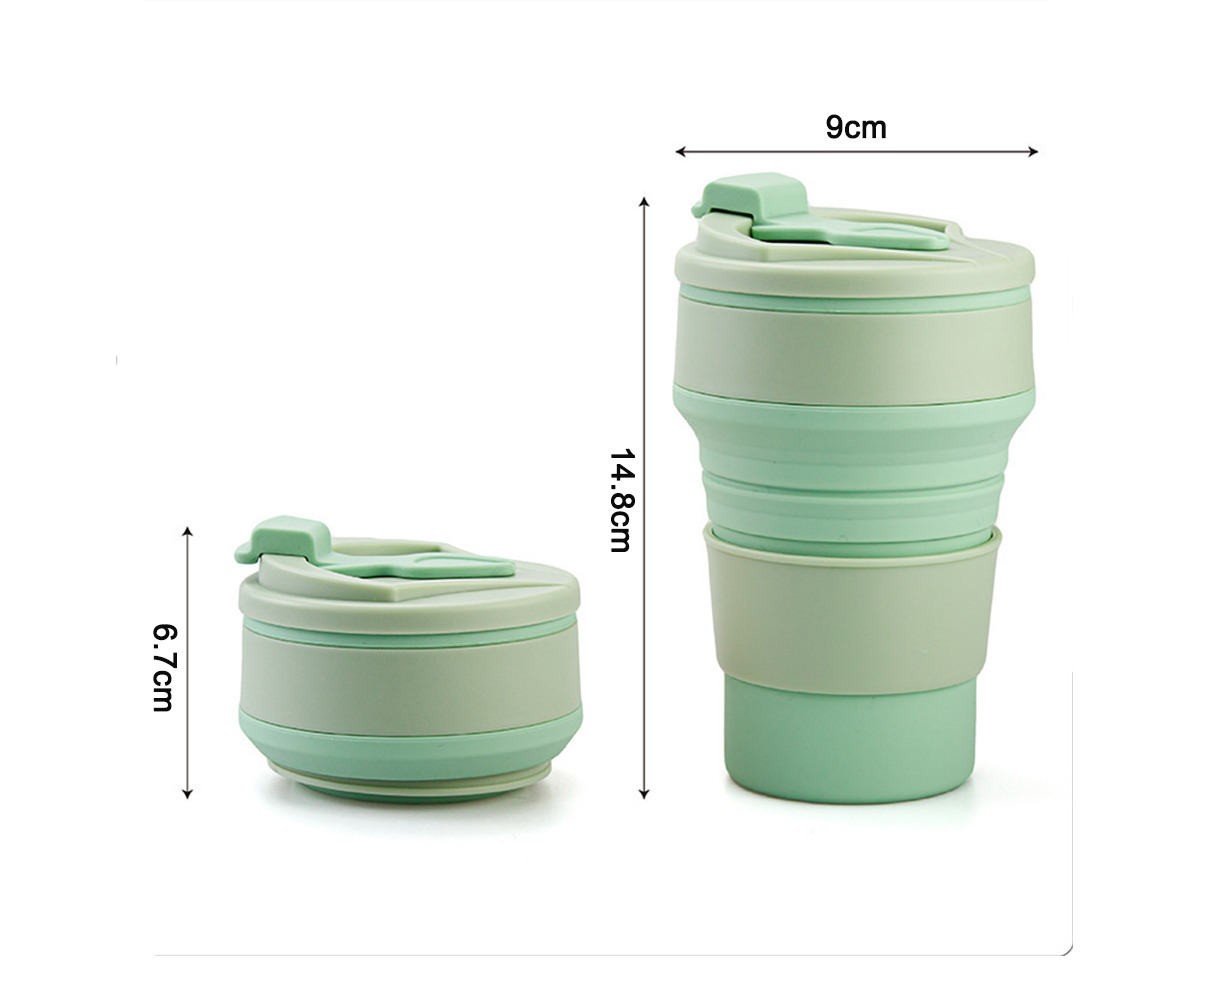 MEGA Silicone Collapsible Cup Portable Foldable Lightweight Travel Coffee Mug with Lid Blue 